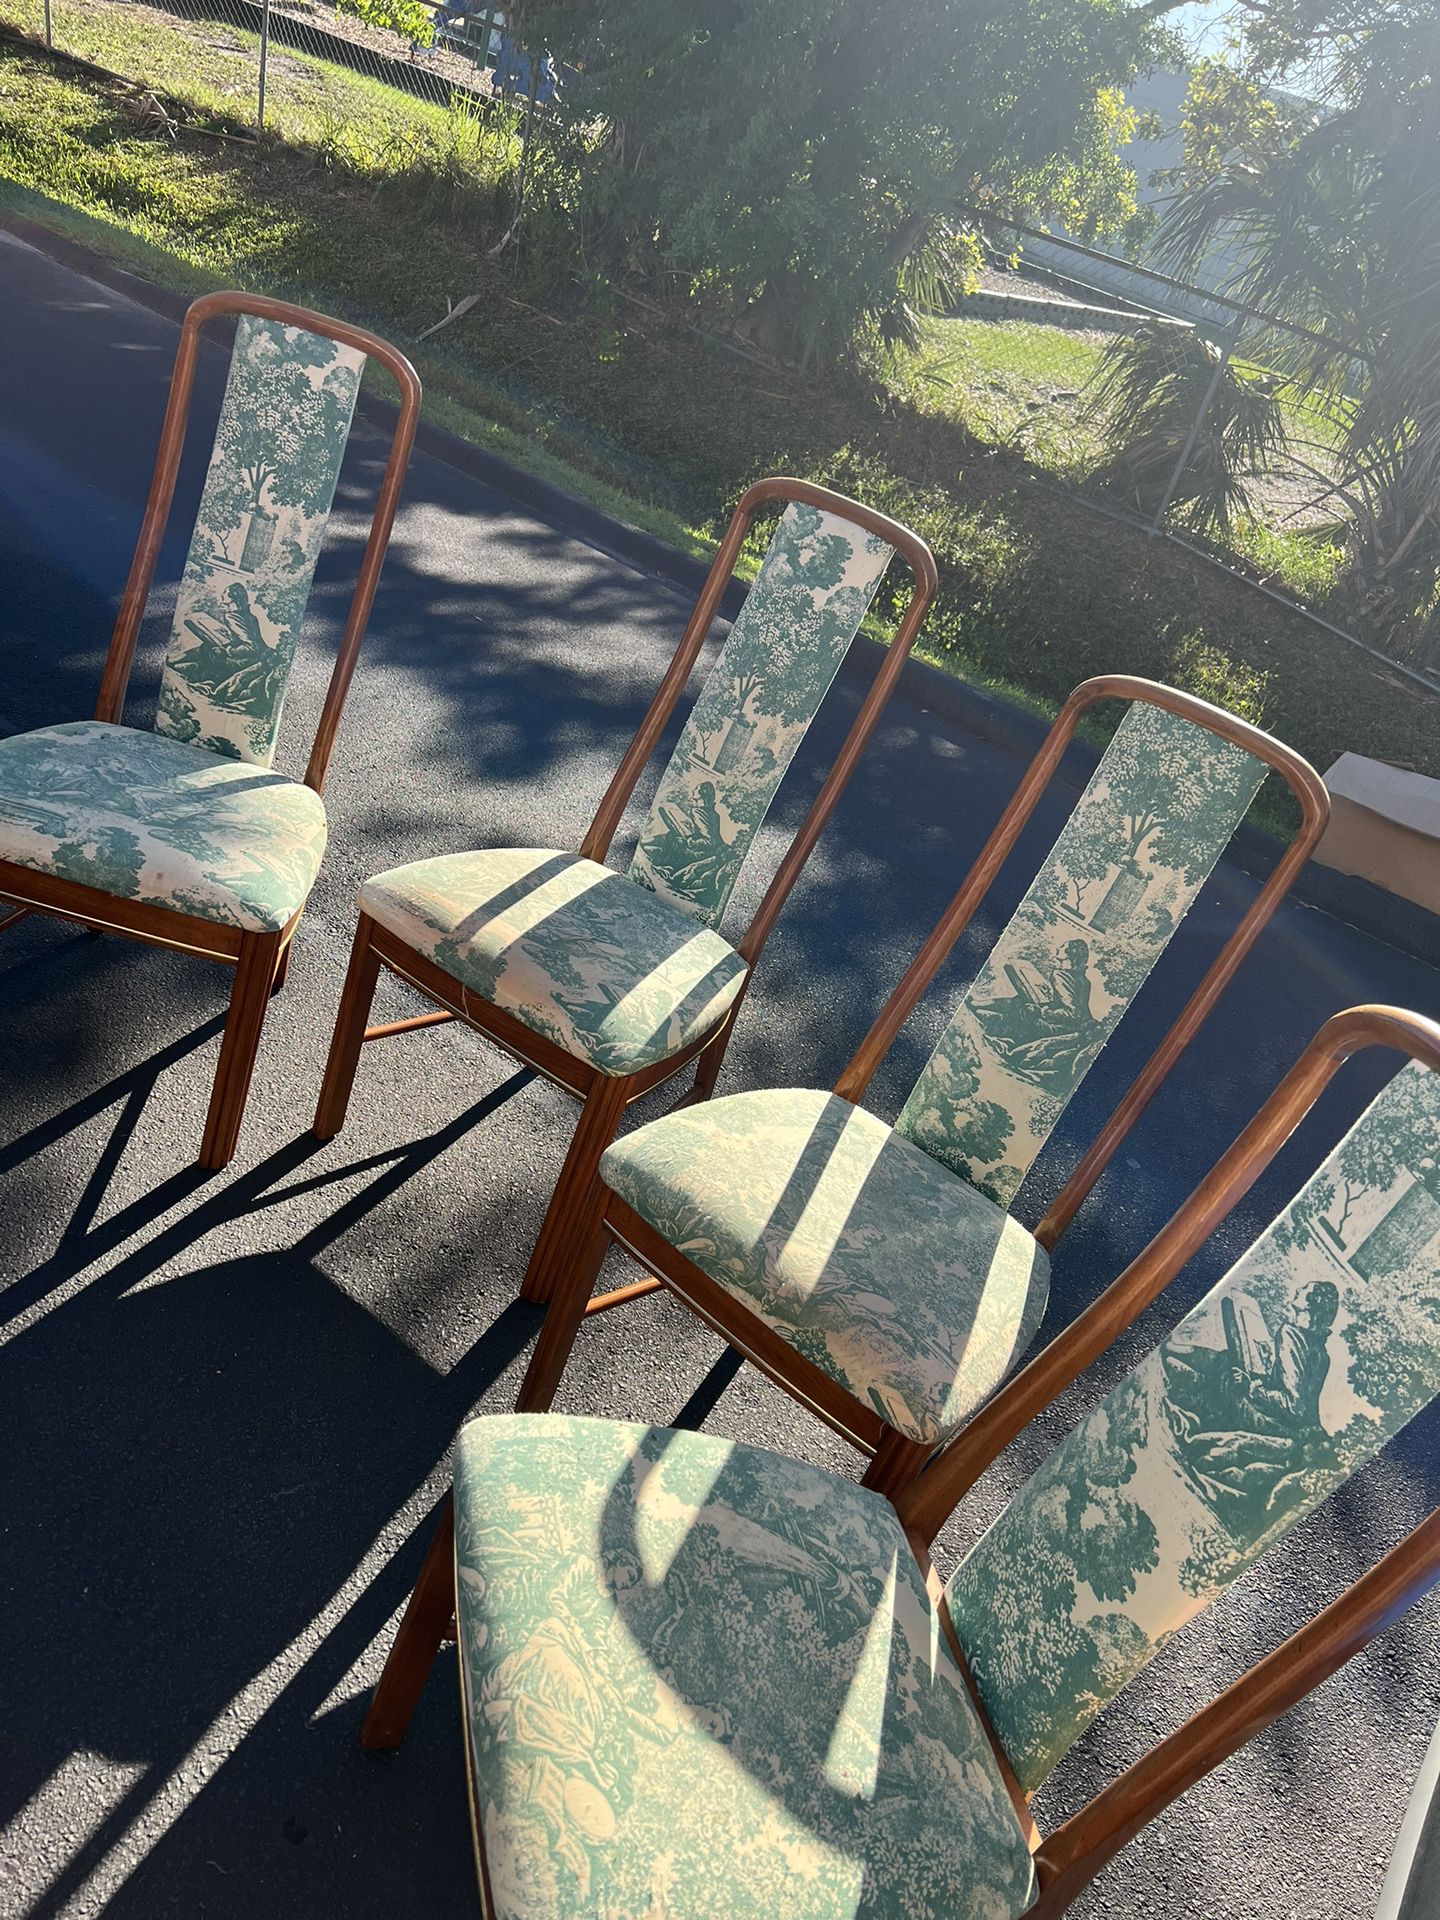 Vintage Chairs (4)